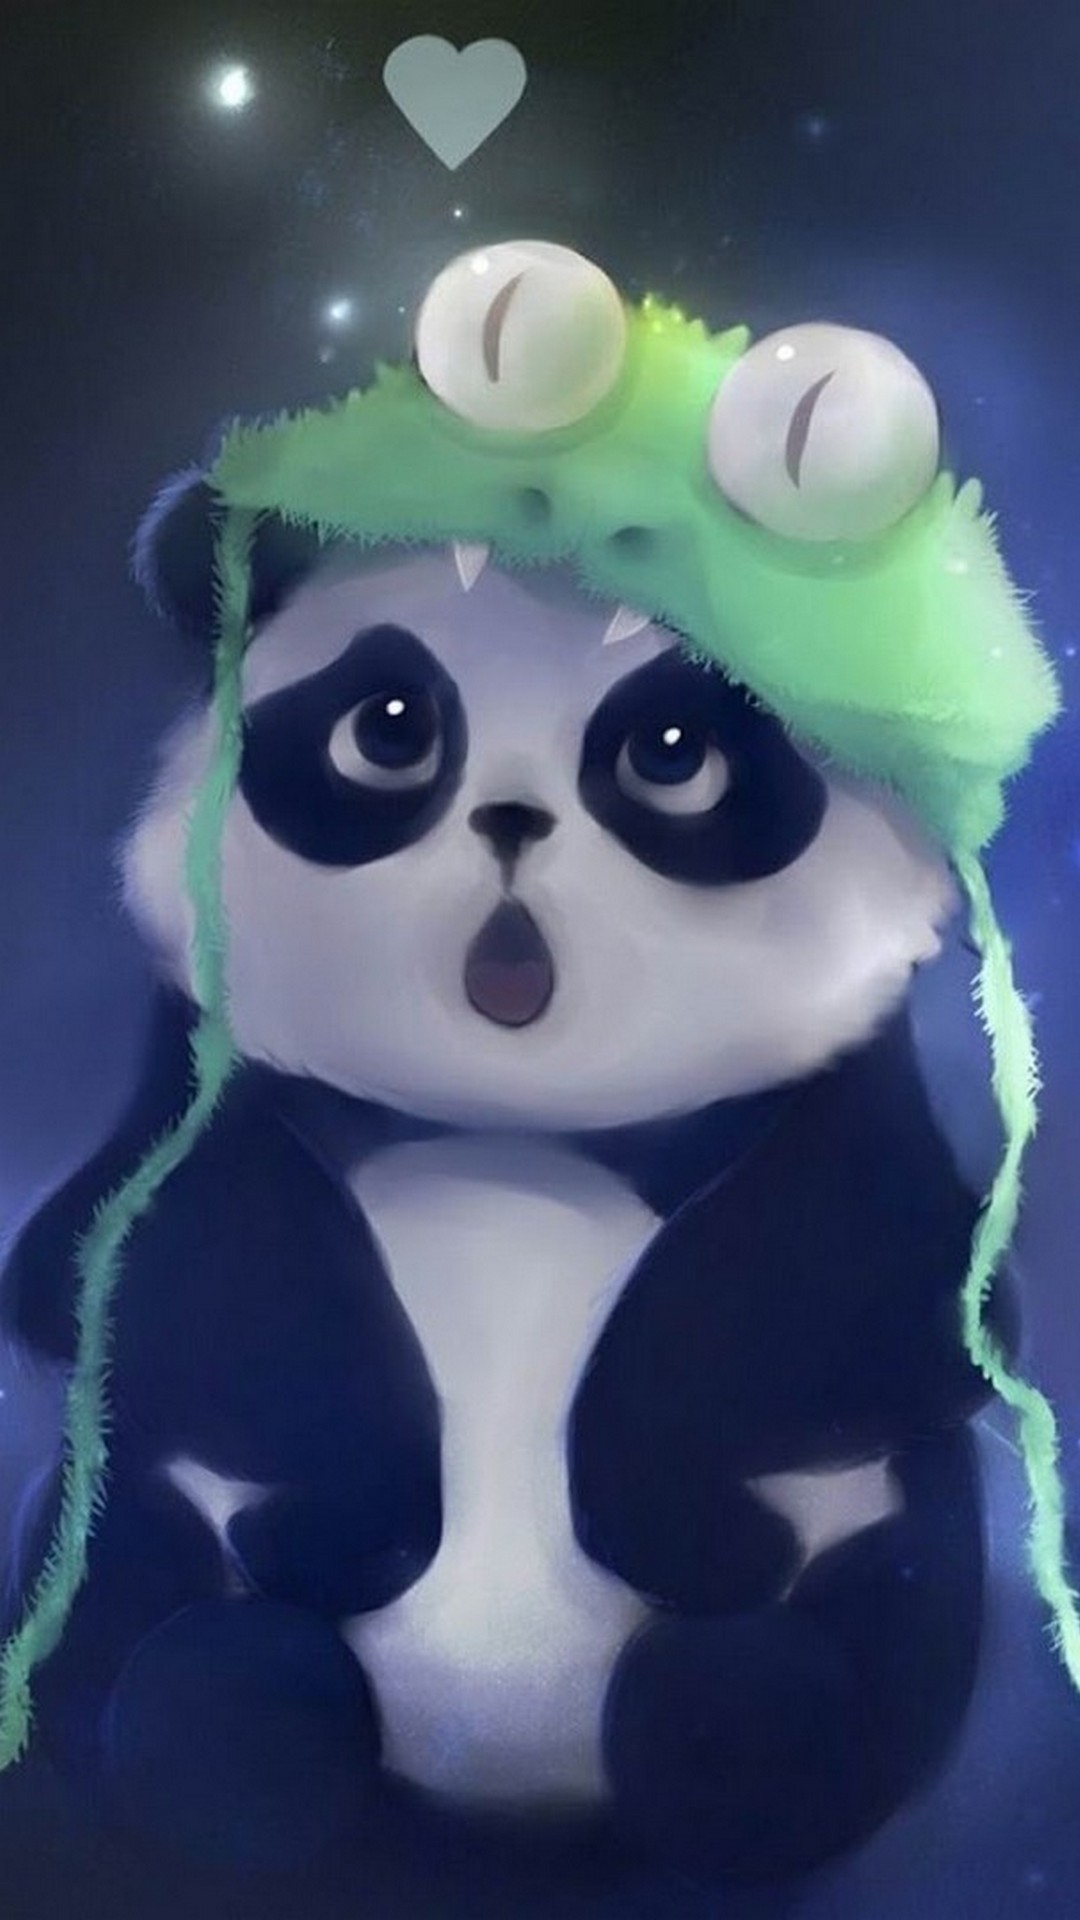 Cute Panda Android Wallpaper with HD resolution 1080x1920